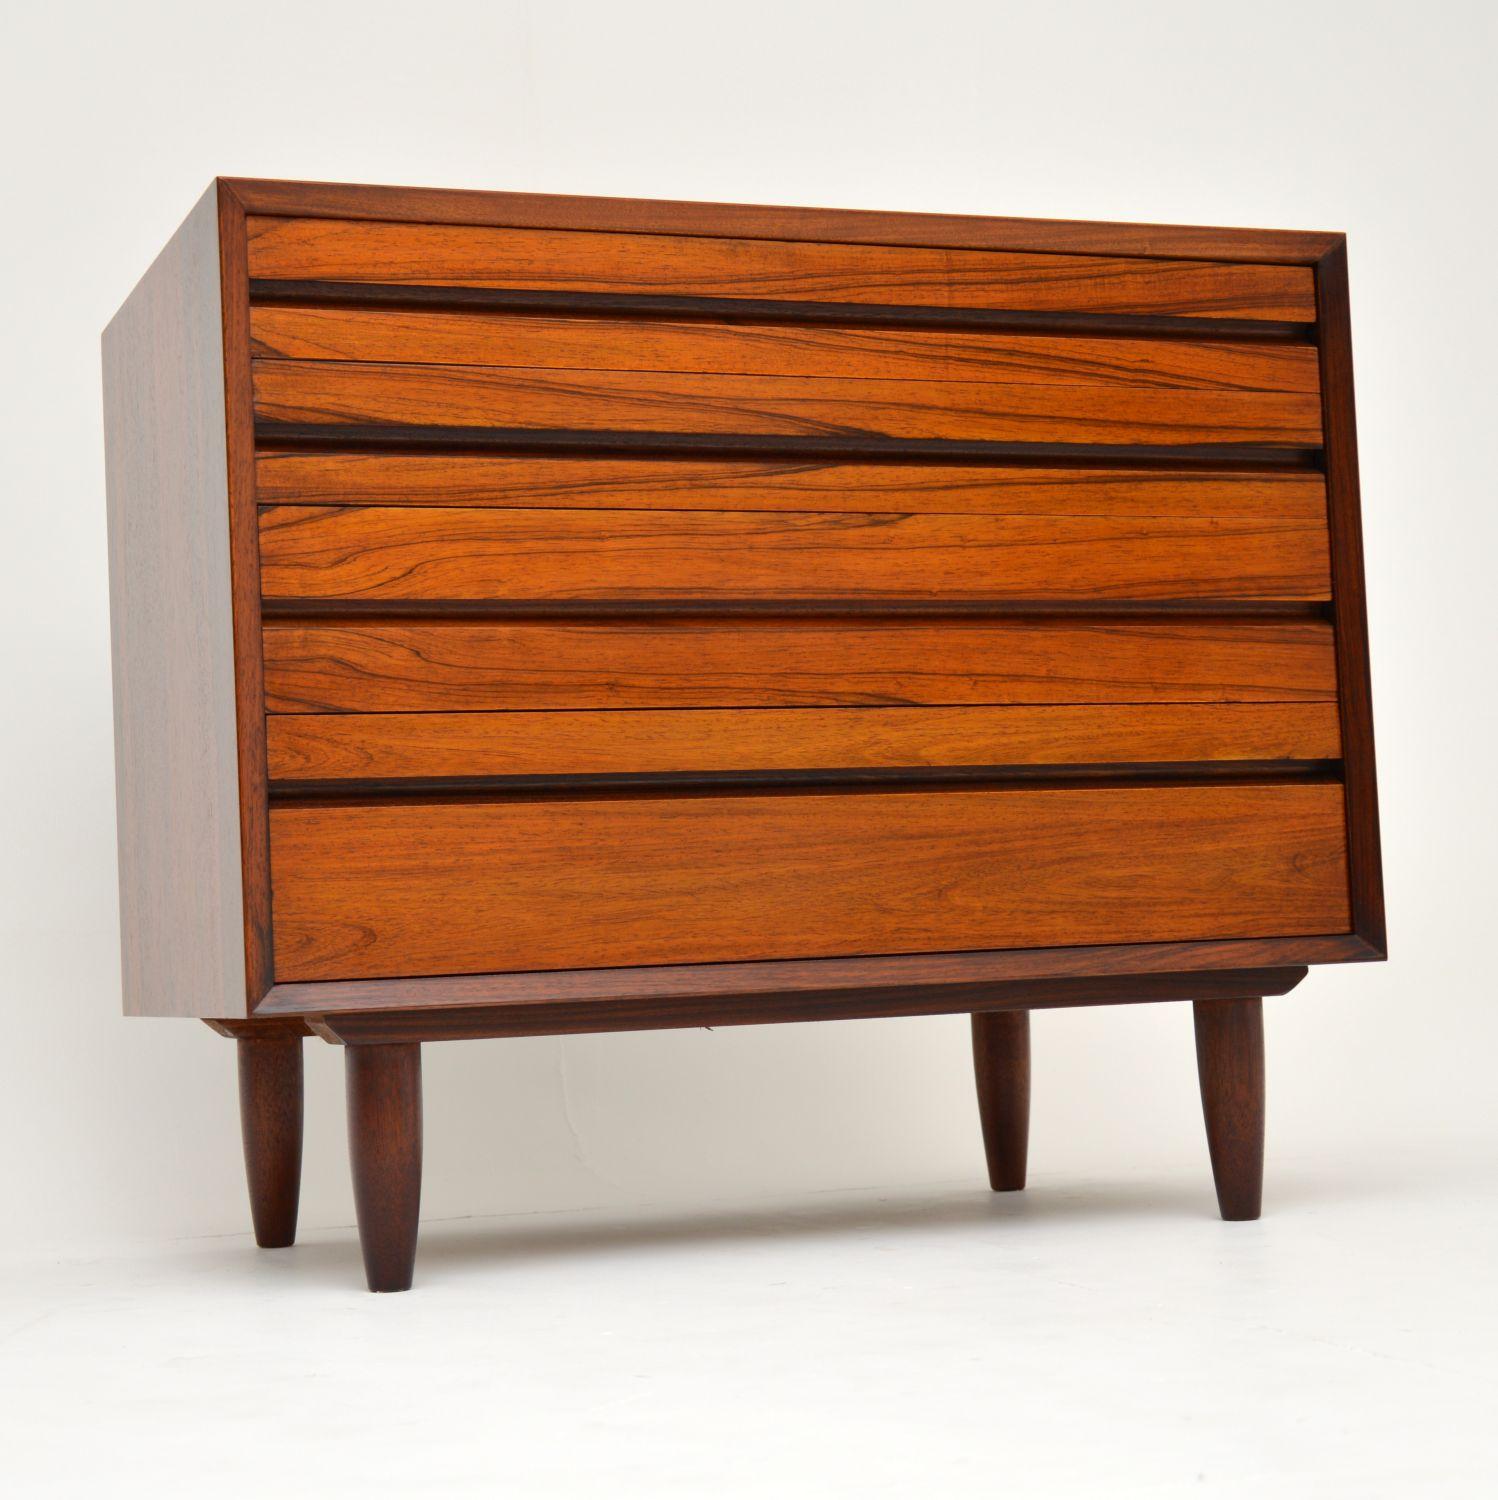 A stunning vintage Danish rosewood chest of drawers, this dates from the 1960’s. It was designed by Poul Cadovius and made in Denmark by Cado. We have had this stripped and re-polished to a very high standard, the condition is excellent throughout.